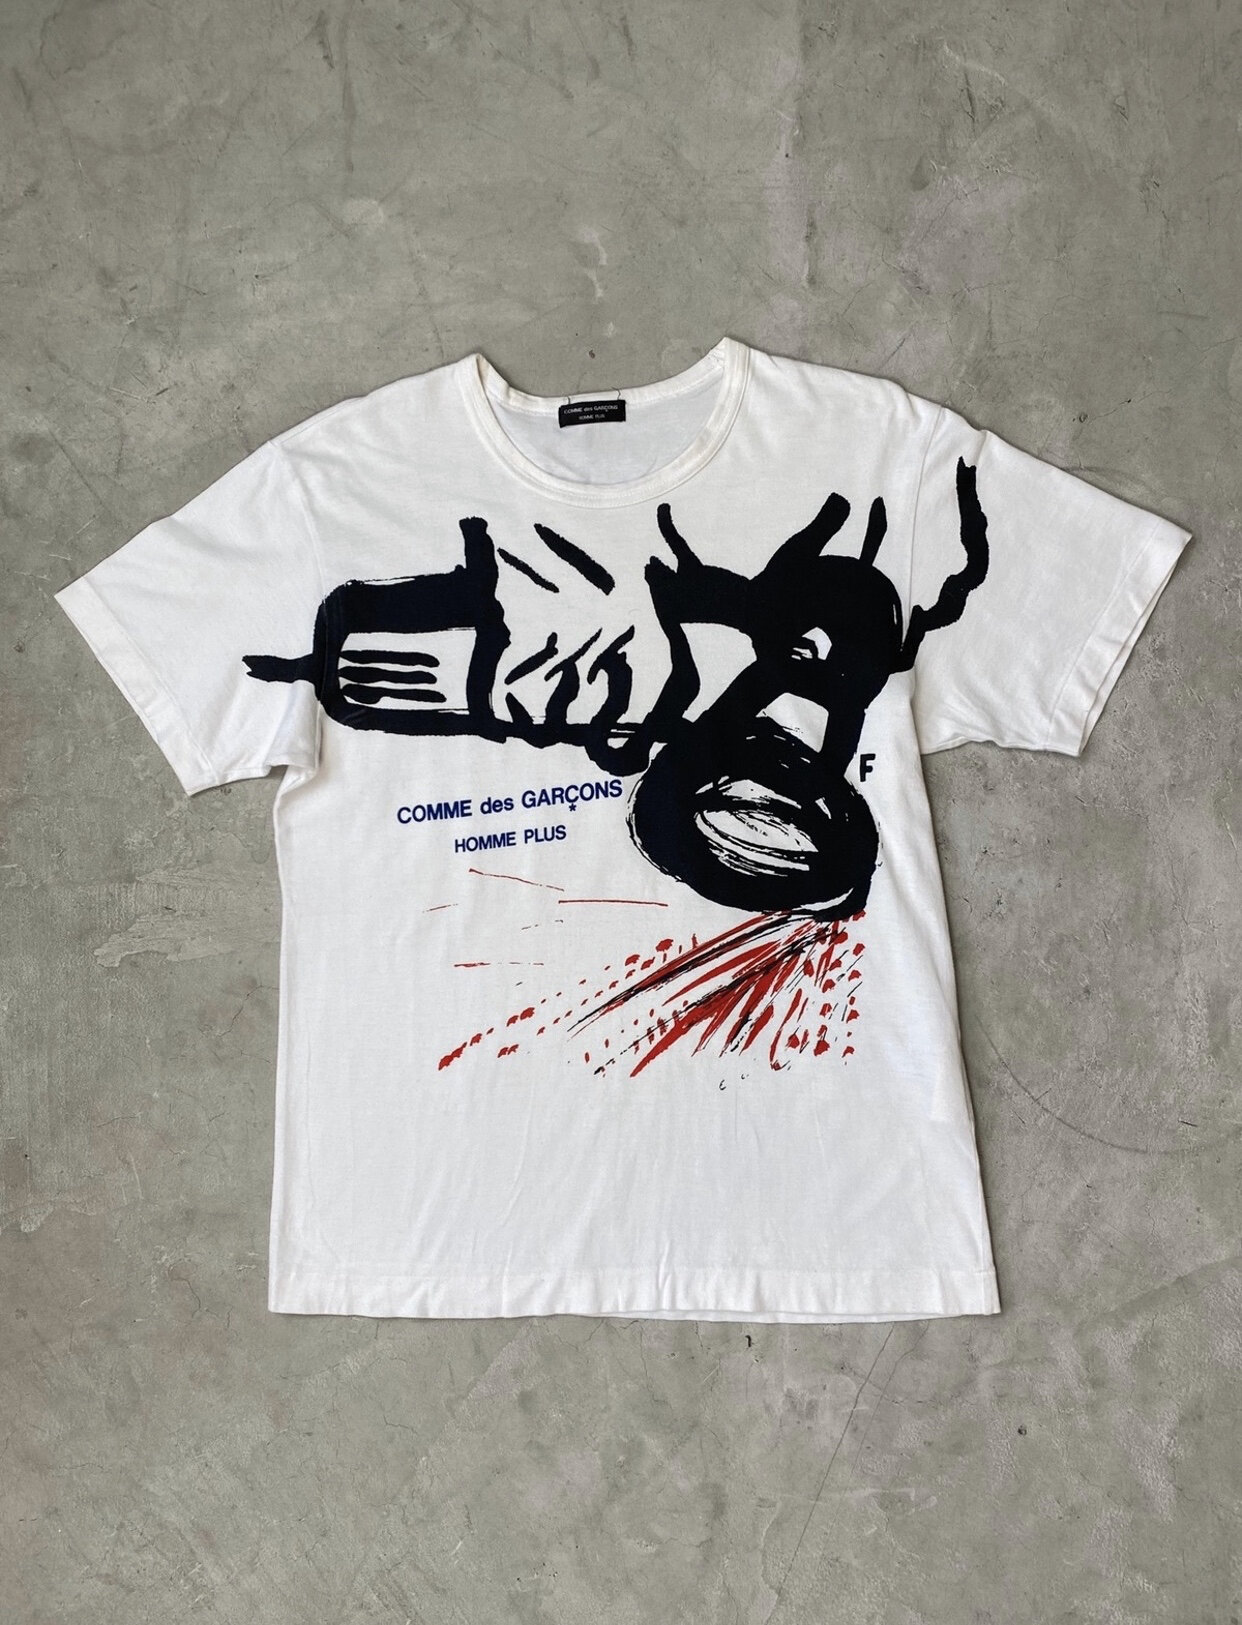 AW/99 Comme Des Garcons Homme Plus Graphic Tee — murderarchive